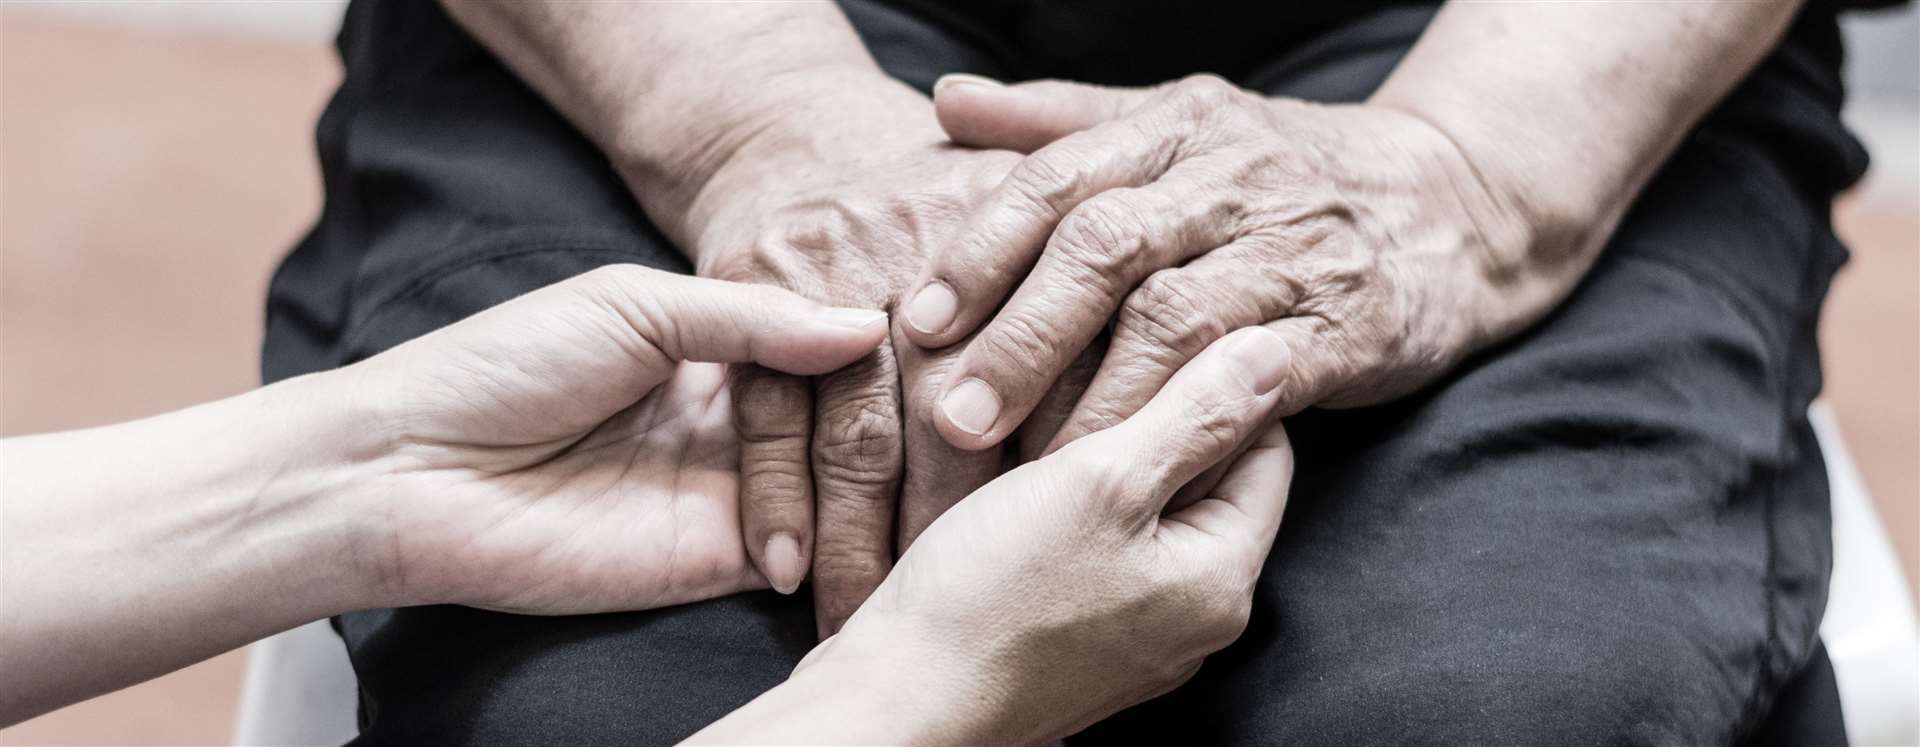 End of Life Care Together involves several organisations, while being led by NHS Highland and Highland Hospice.